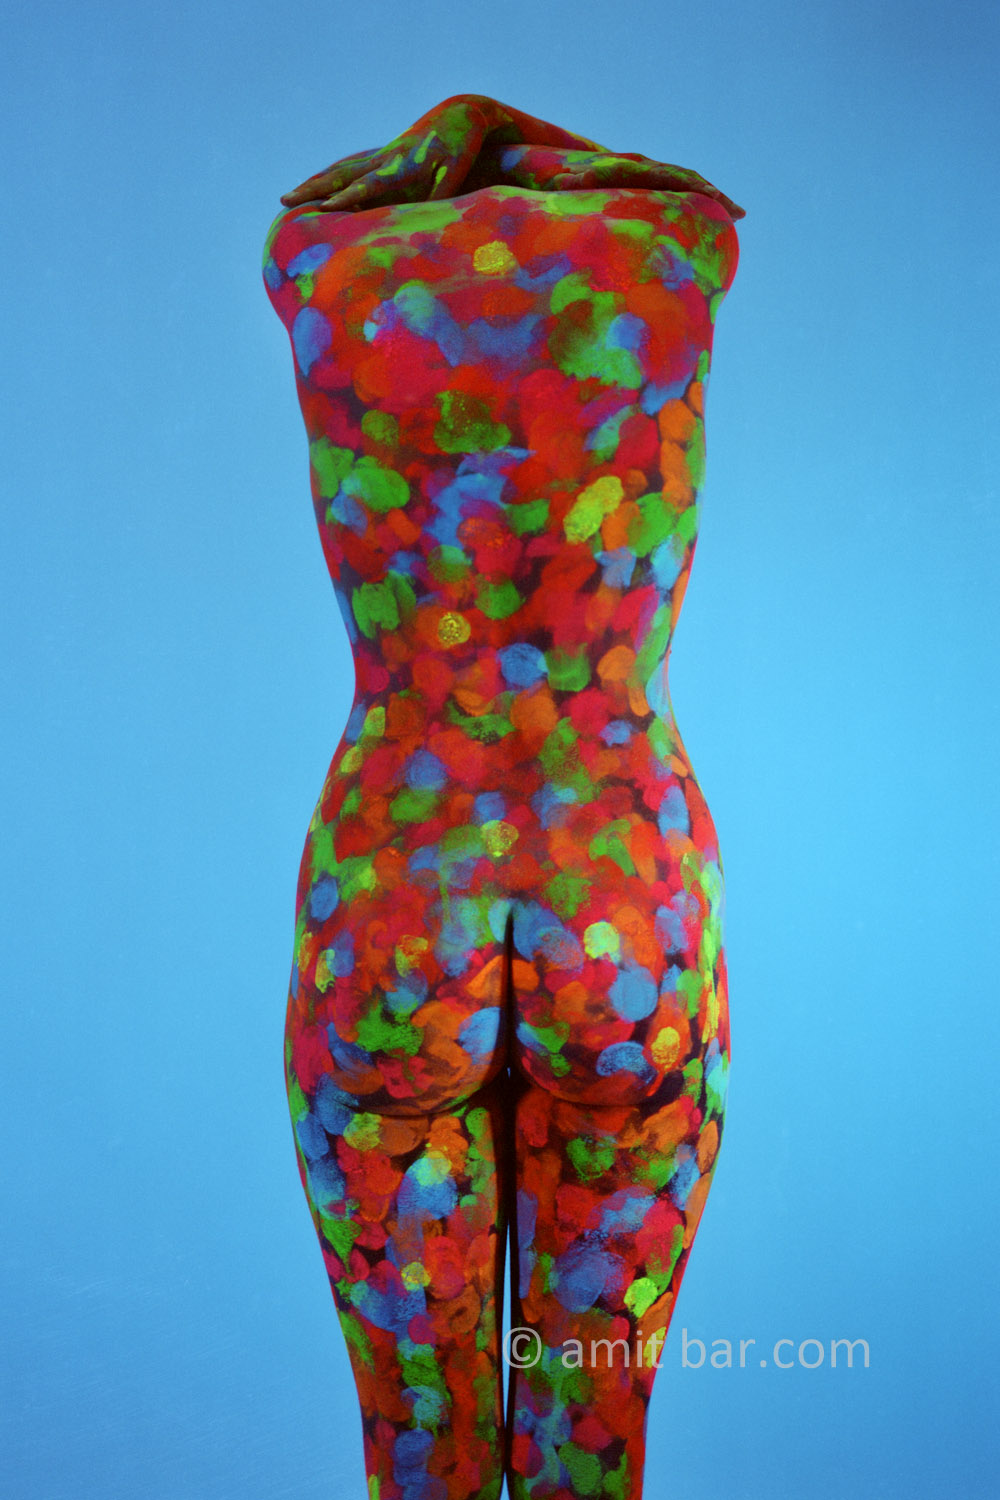 Abstraction II: Body-painted model in colored stains